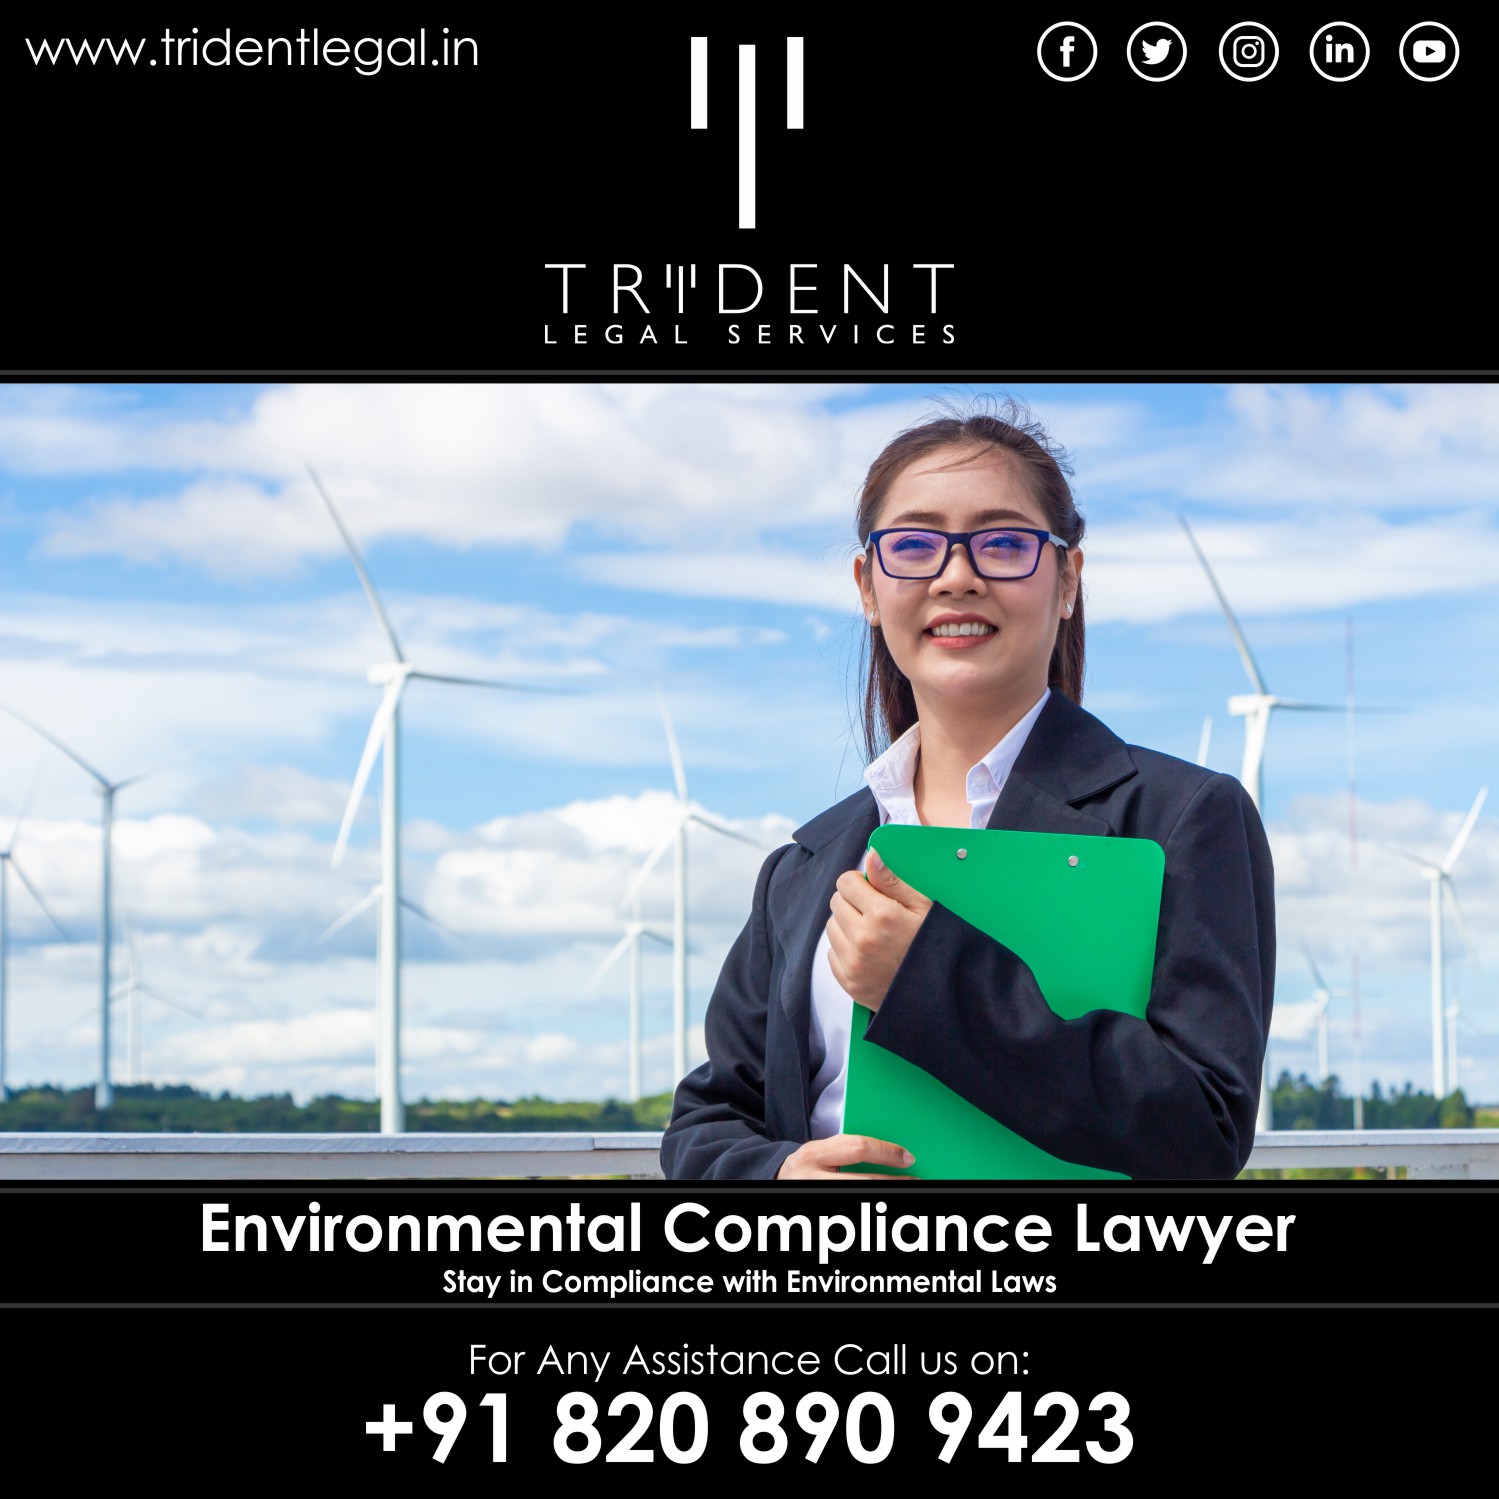 Environmental Compliance Lawyer in Pune